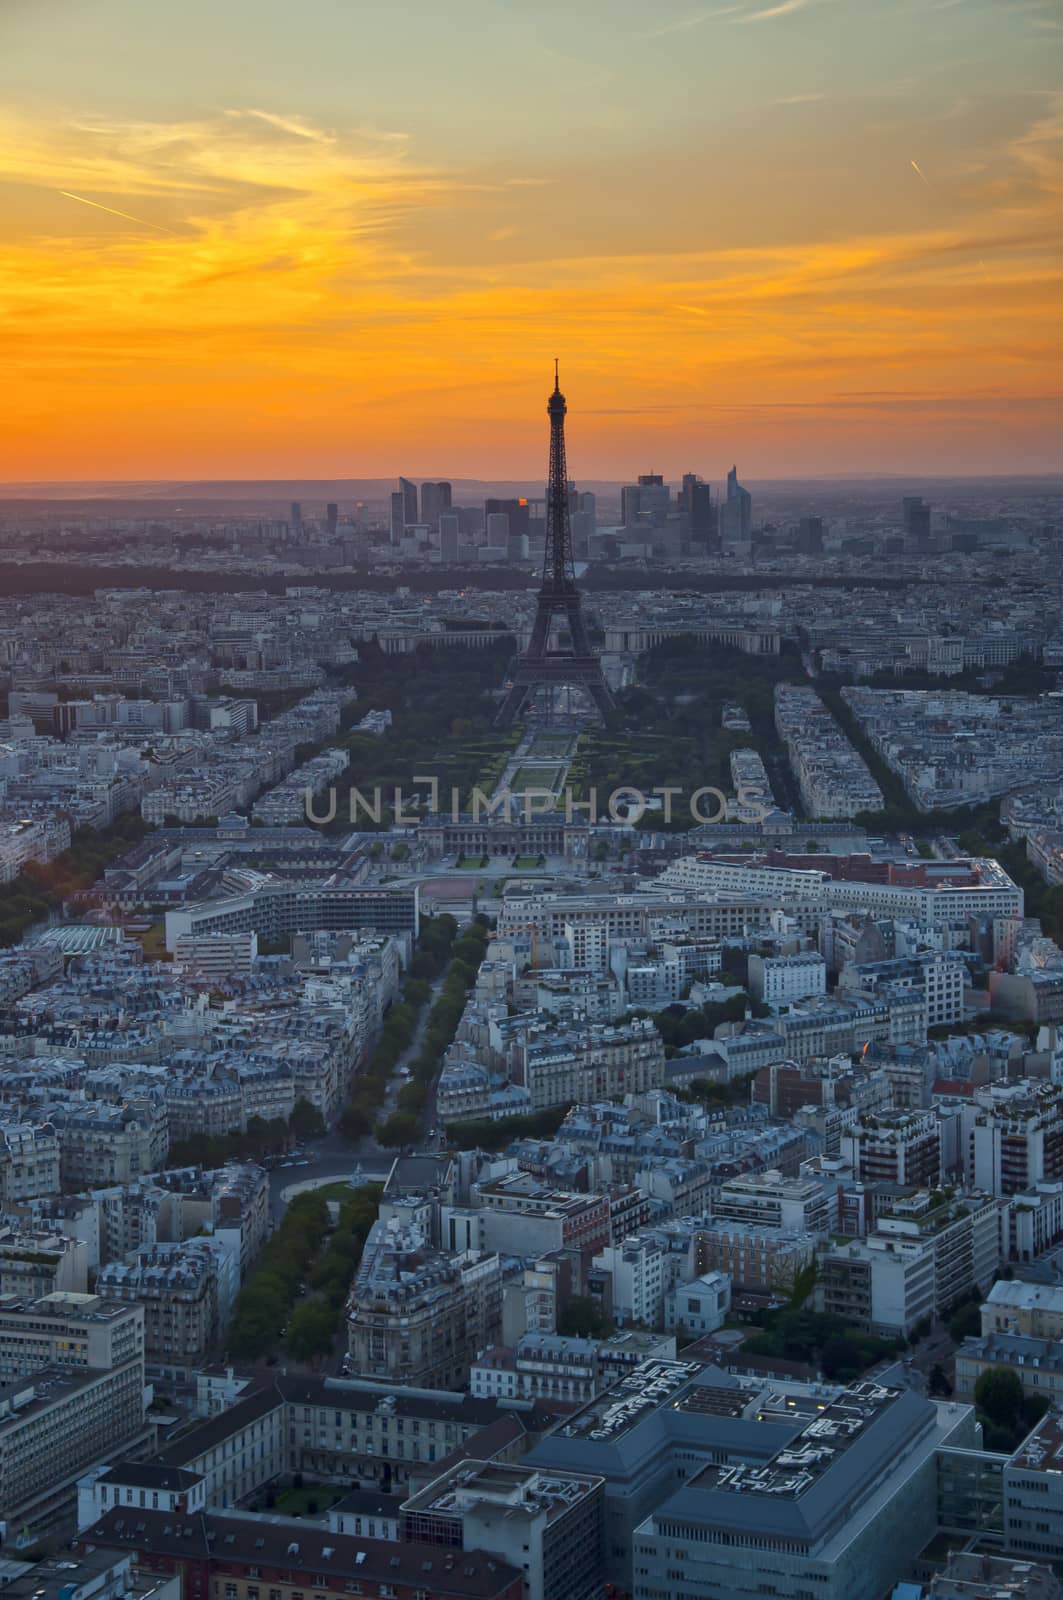 Paris city at sunset by sognolucido